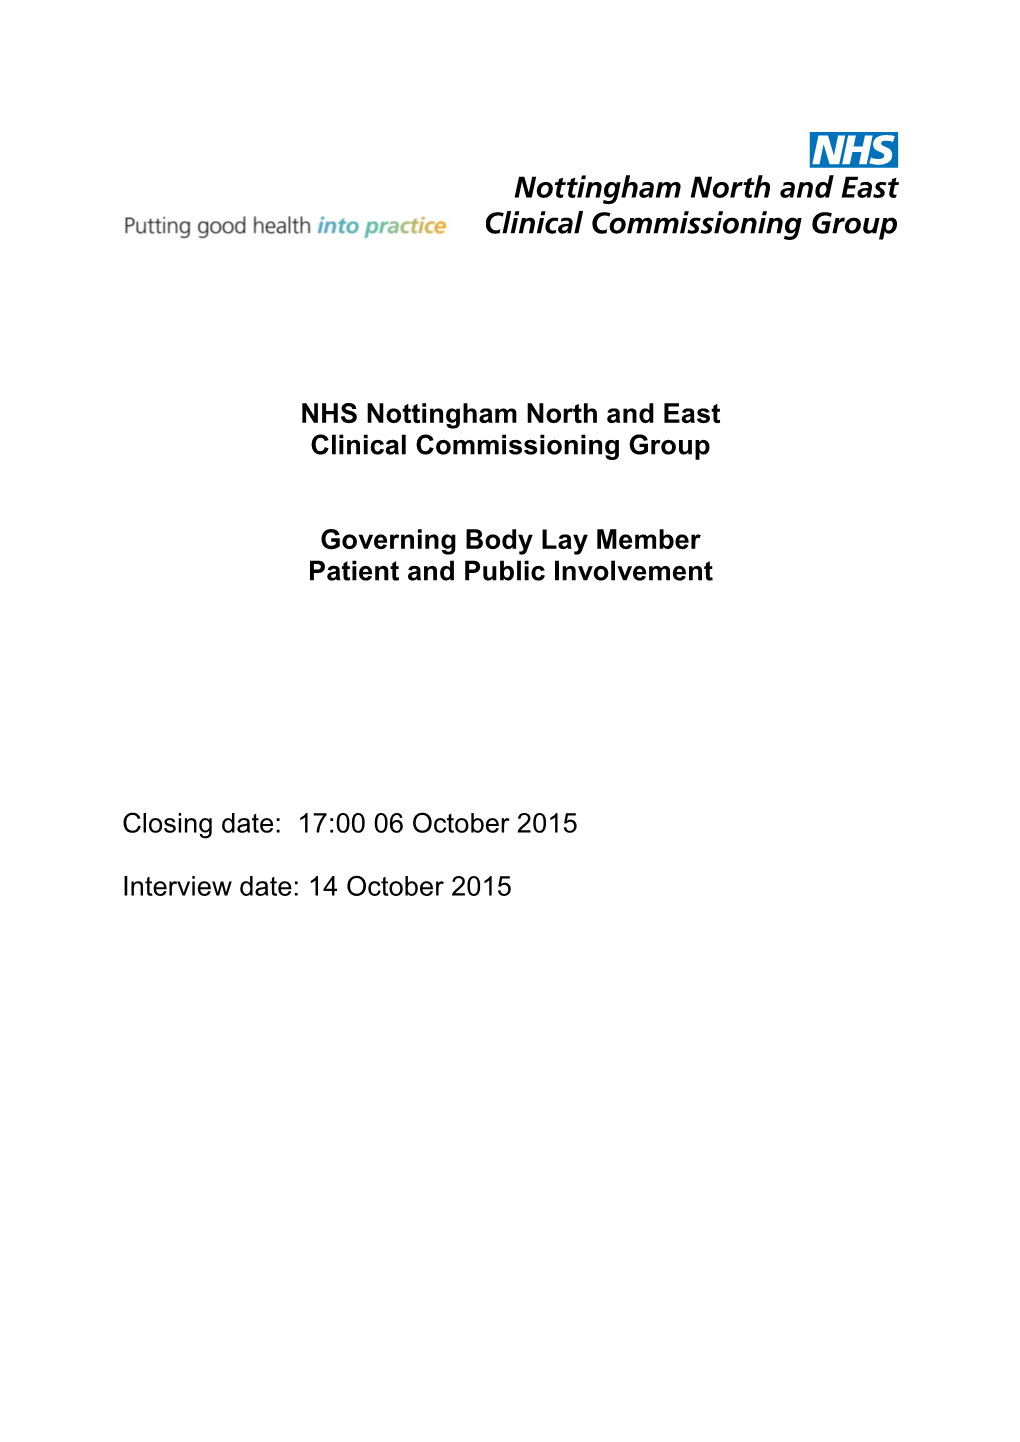 NHS Nottingham North and East Clinical Commissioning Group